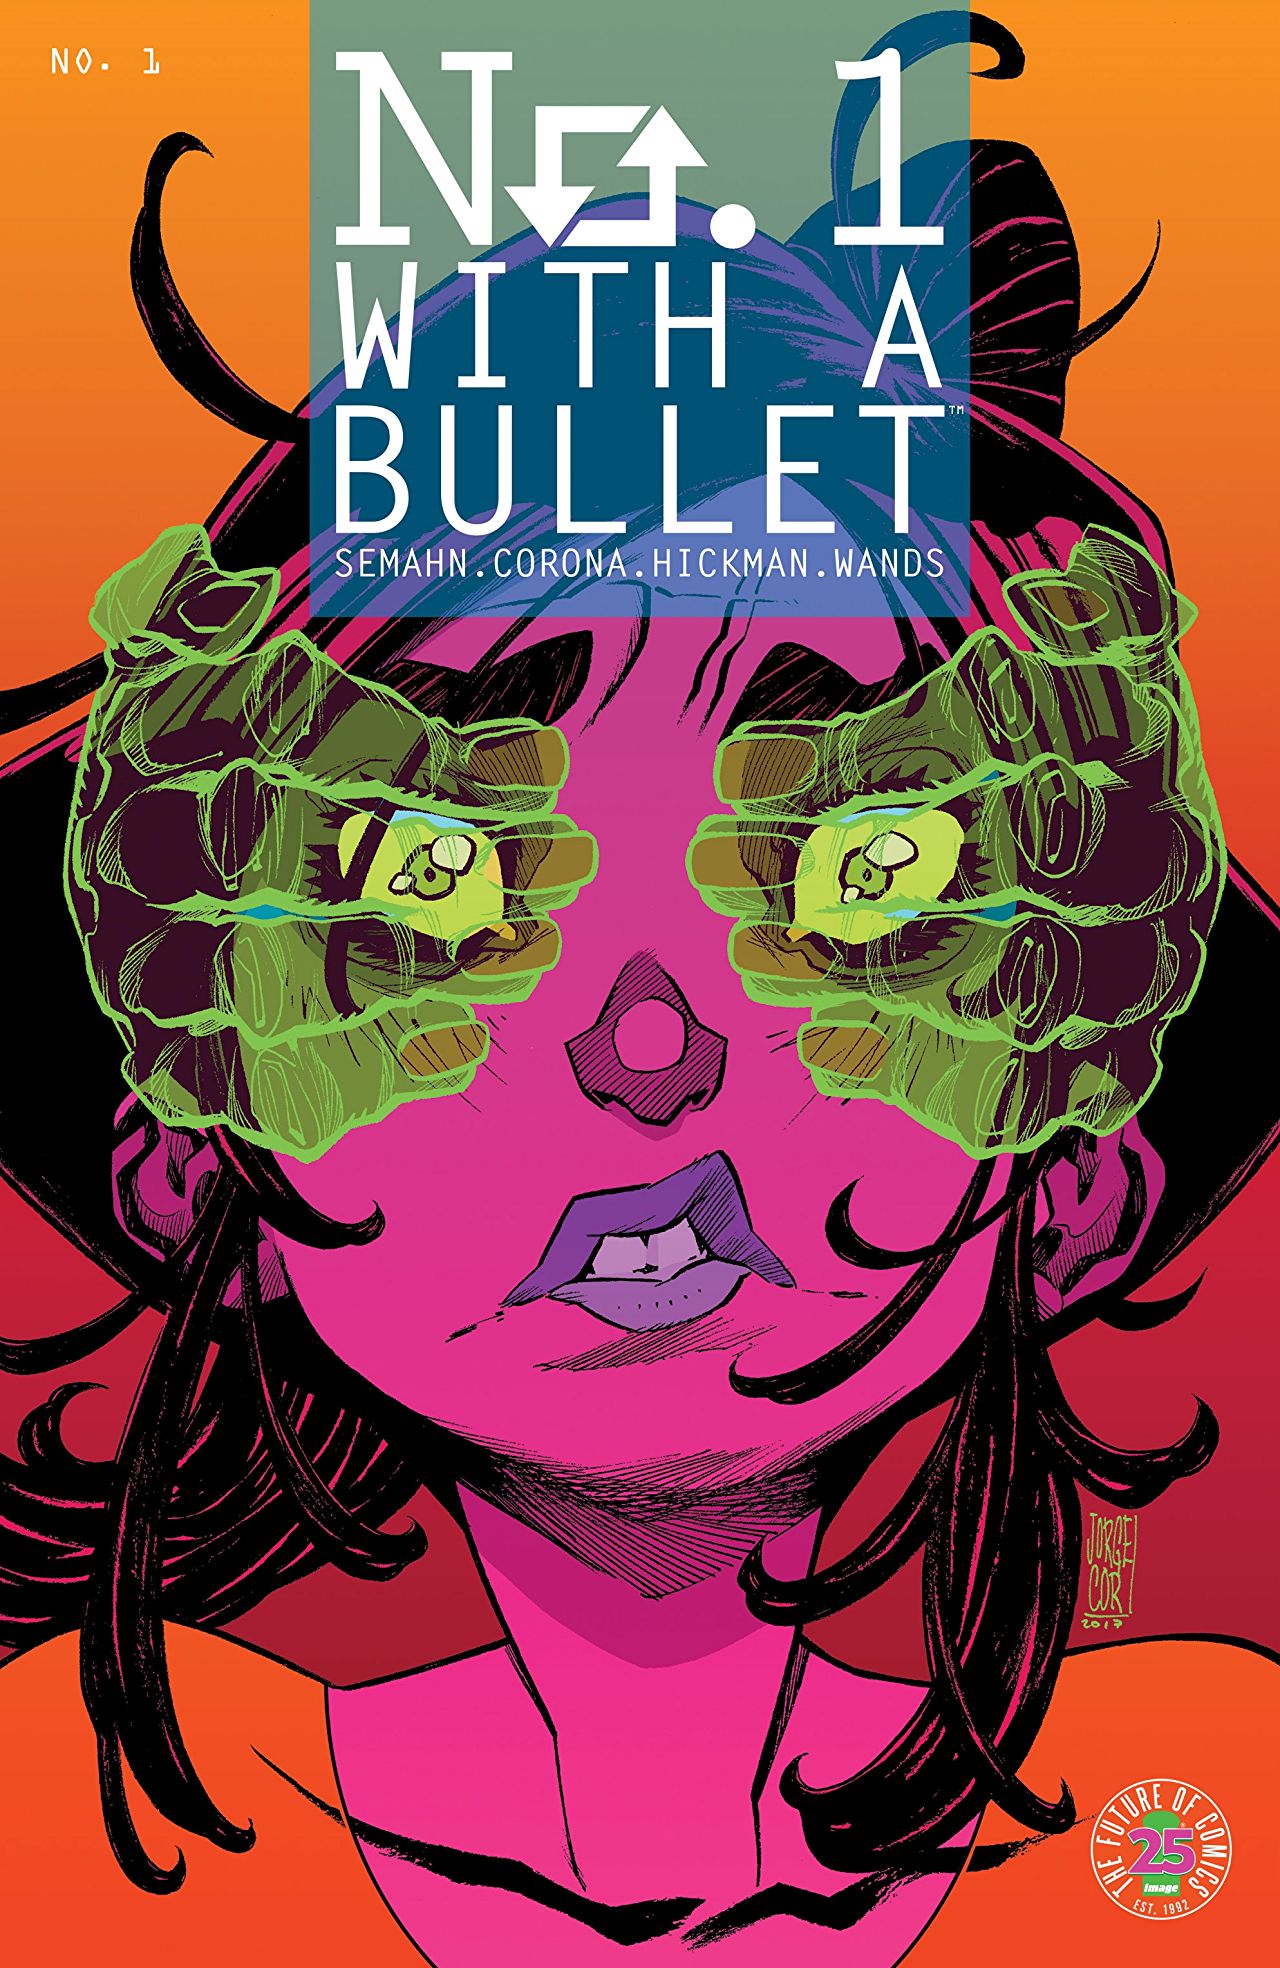 No. 1 With a Bullet #1 Review